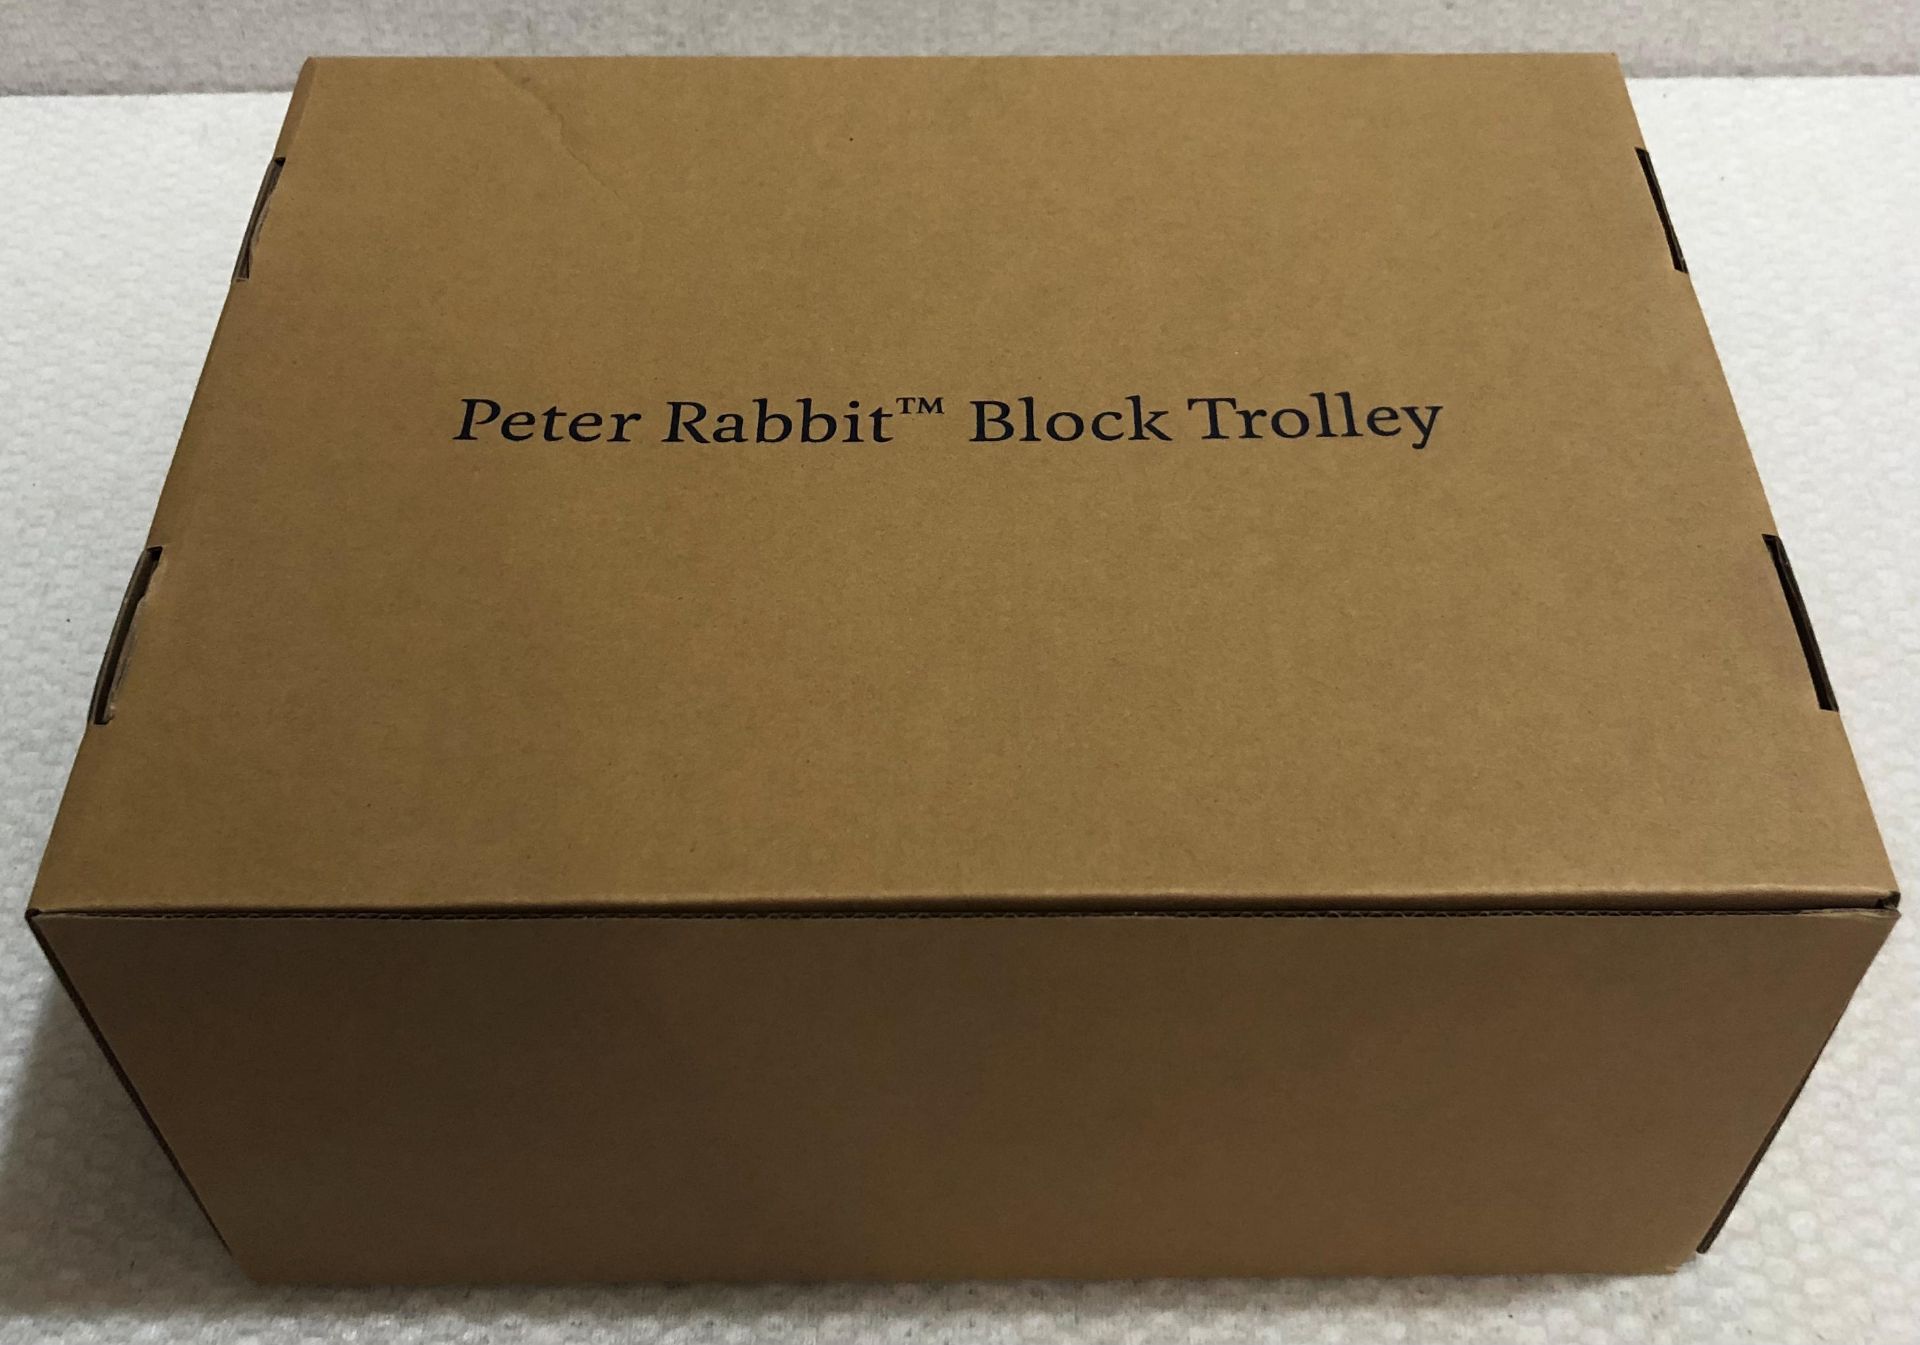 1 x Peter Rabbit Block Trolley By Orange Tree Toys - New/Boxed - HTYS294 - CL987 - Location: - Image 5 of 6